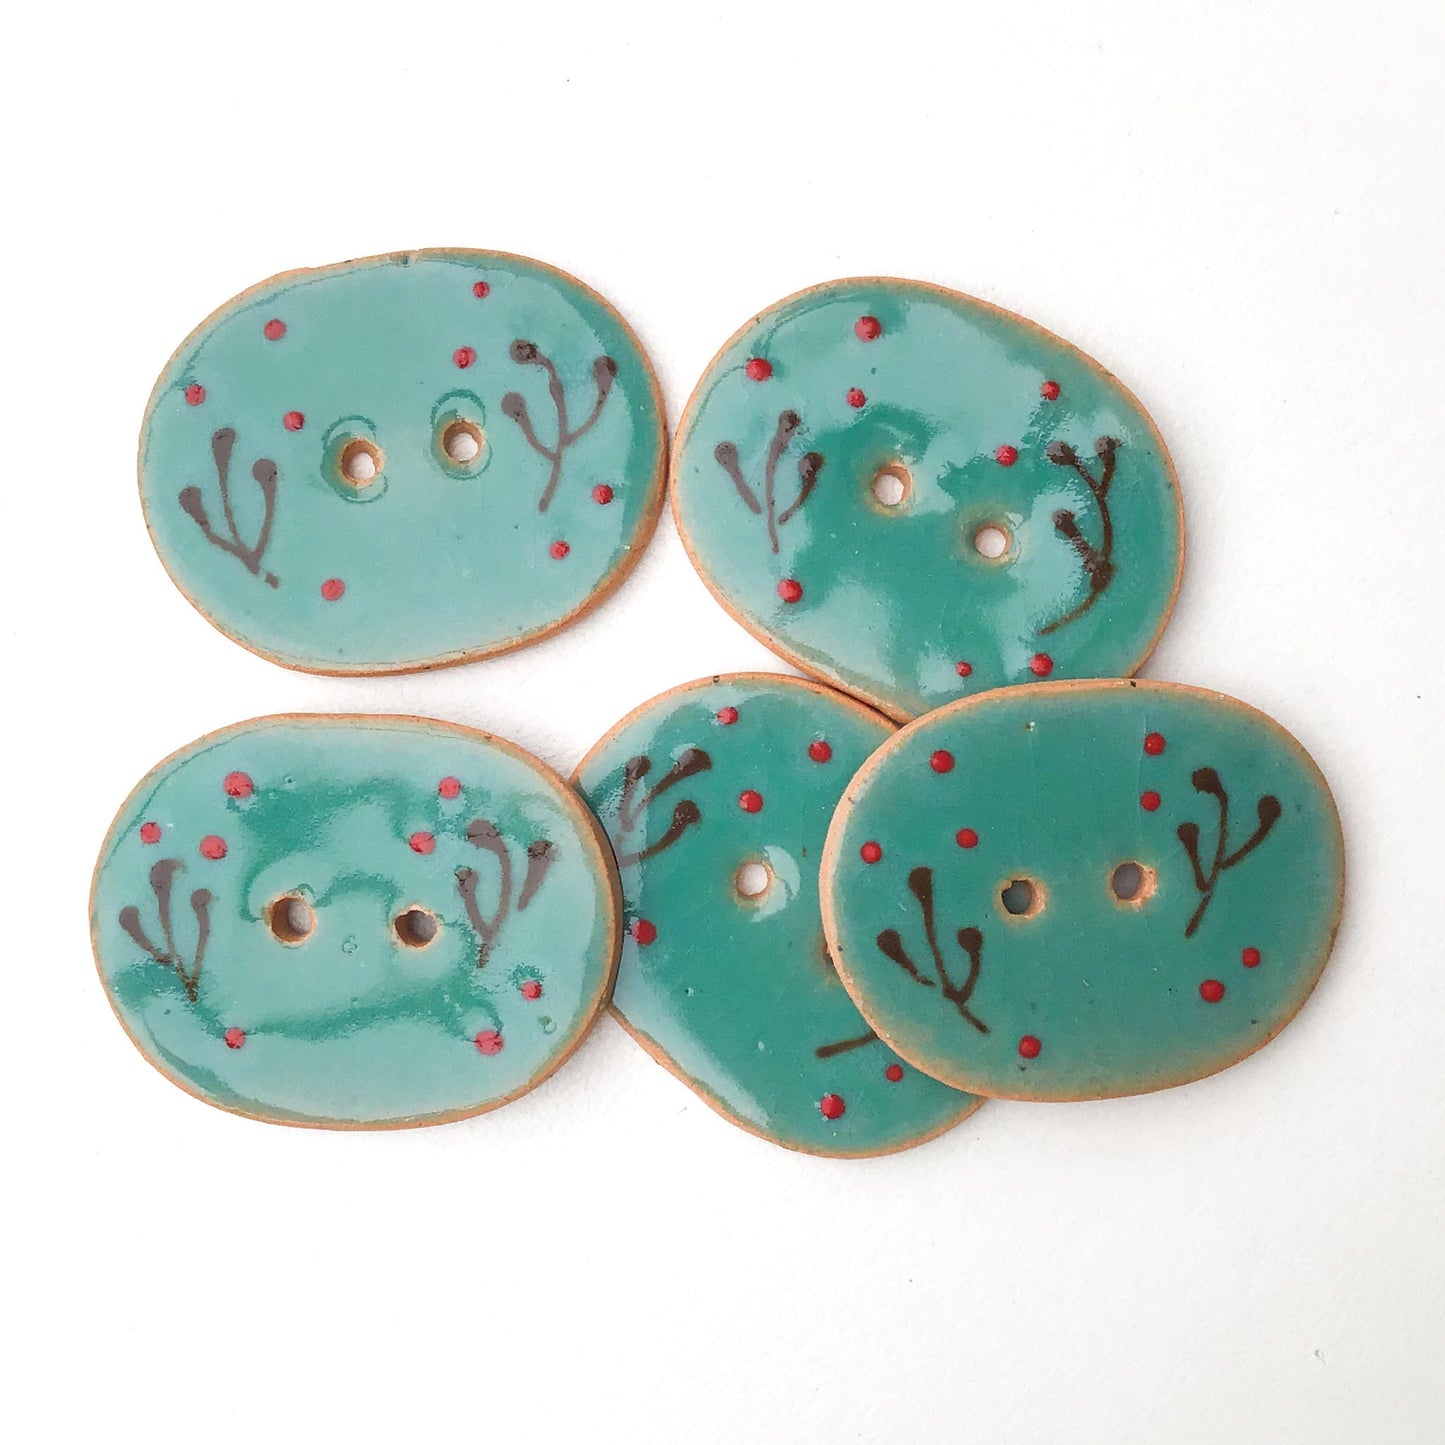 Decorative Ceramic Button with Floral Print  -Teal - Green-Blue Oval Clay Button - 1" x 1 1/4"